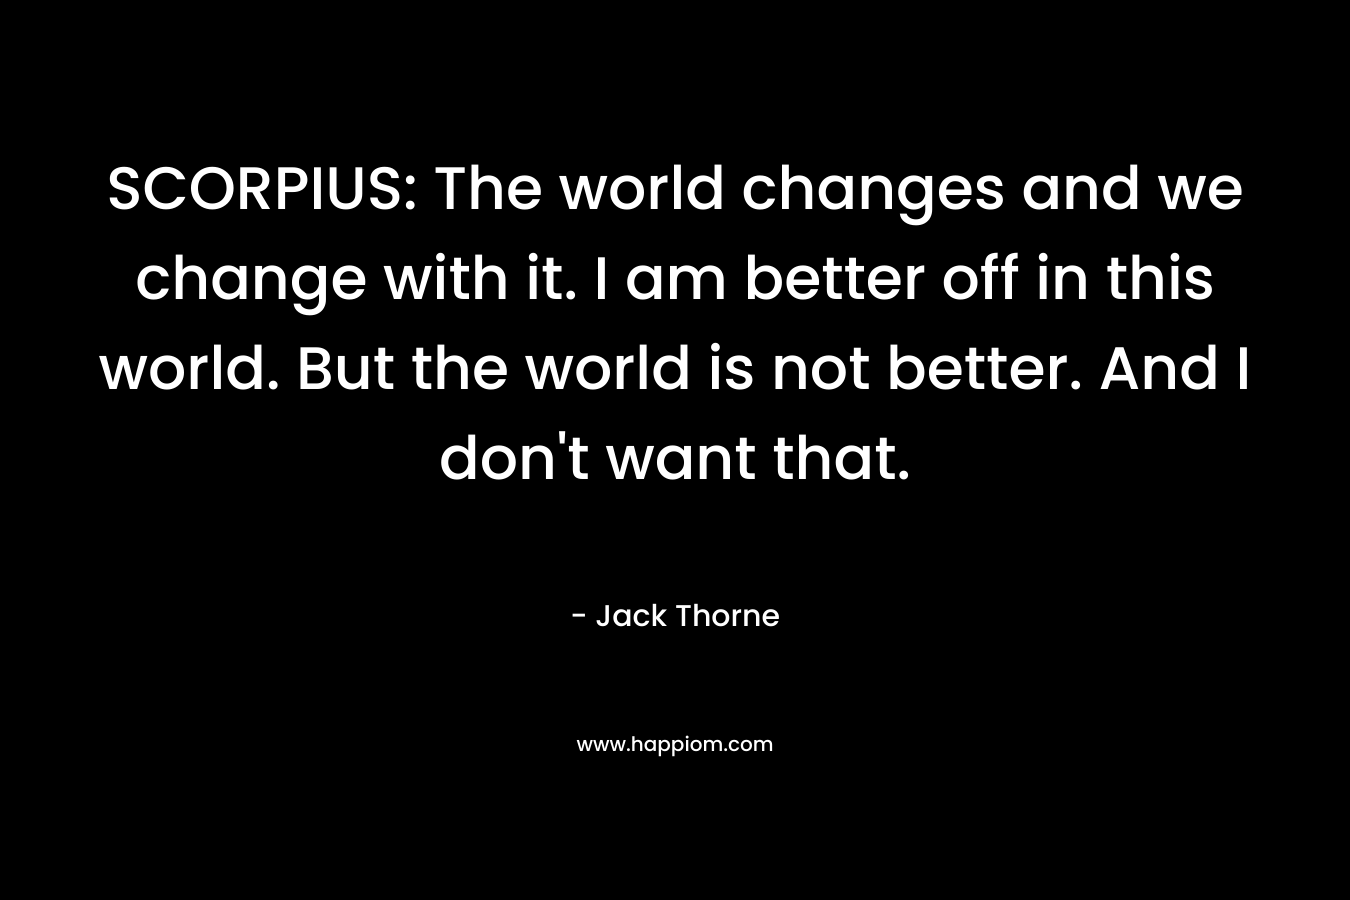 SCORPIUS: The world changes and we change with it. I am better off in this world. But the world is not better. And I don't want that.